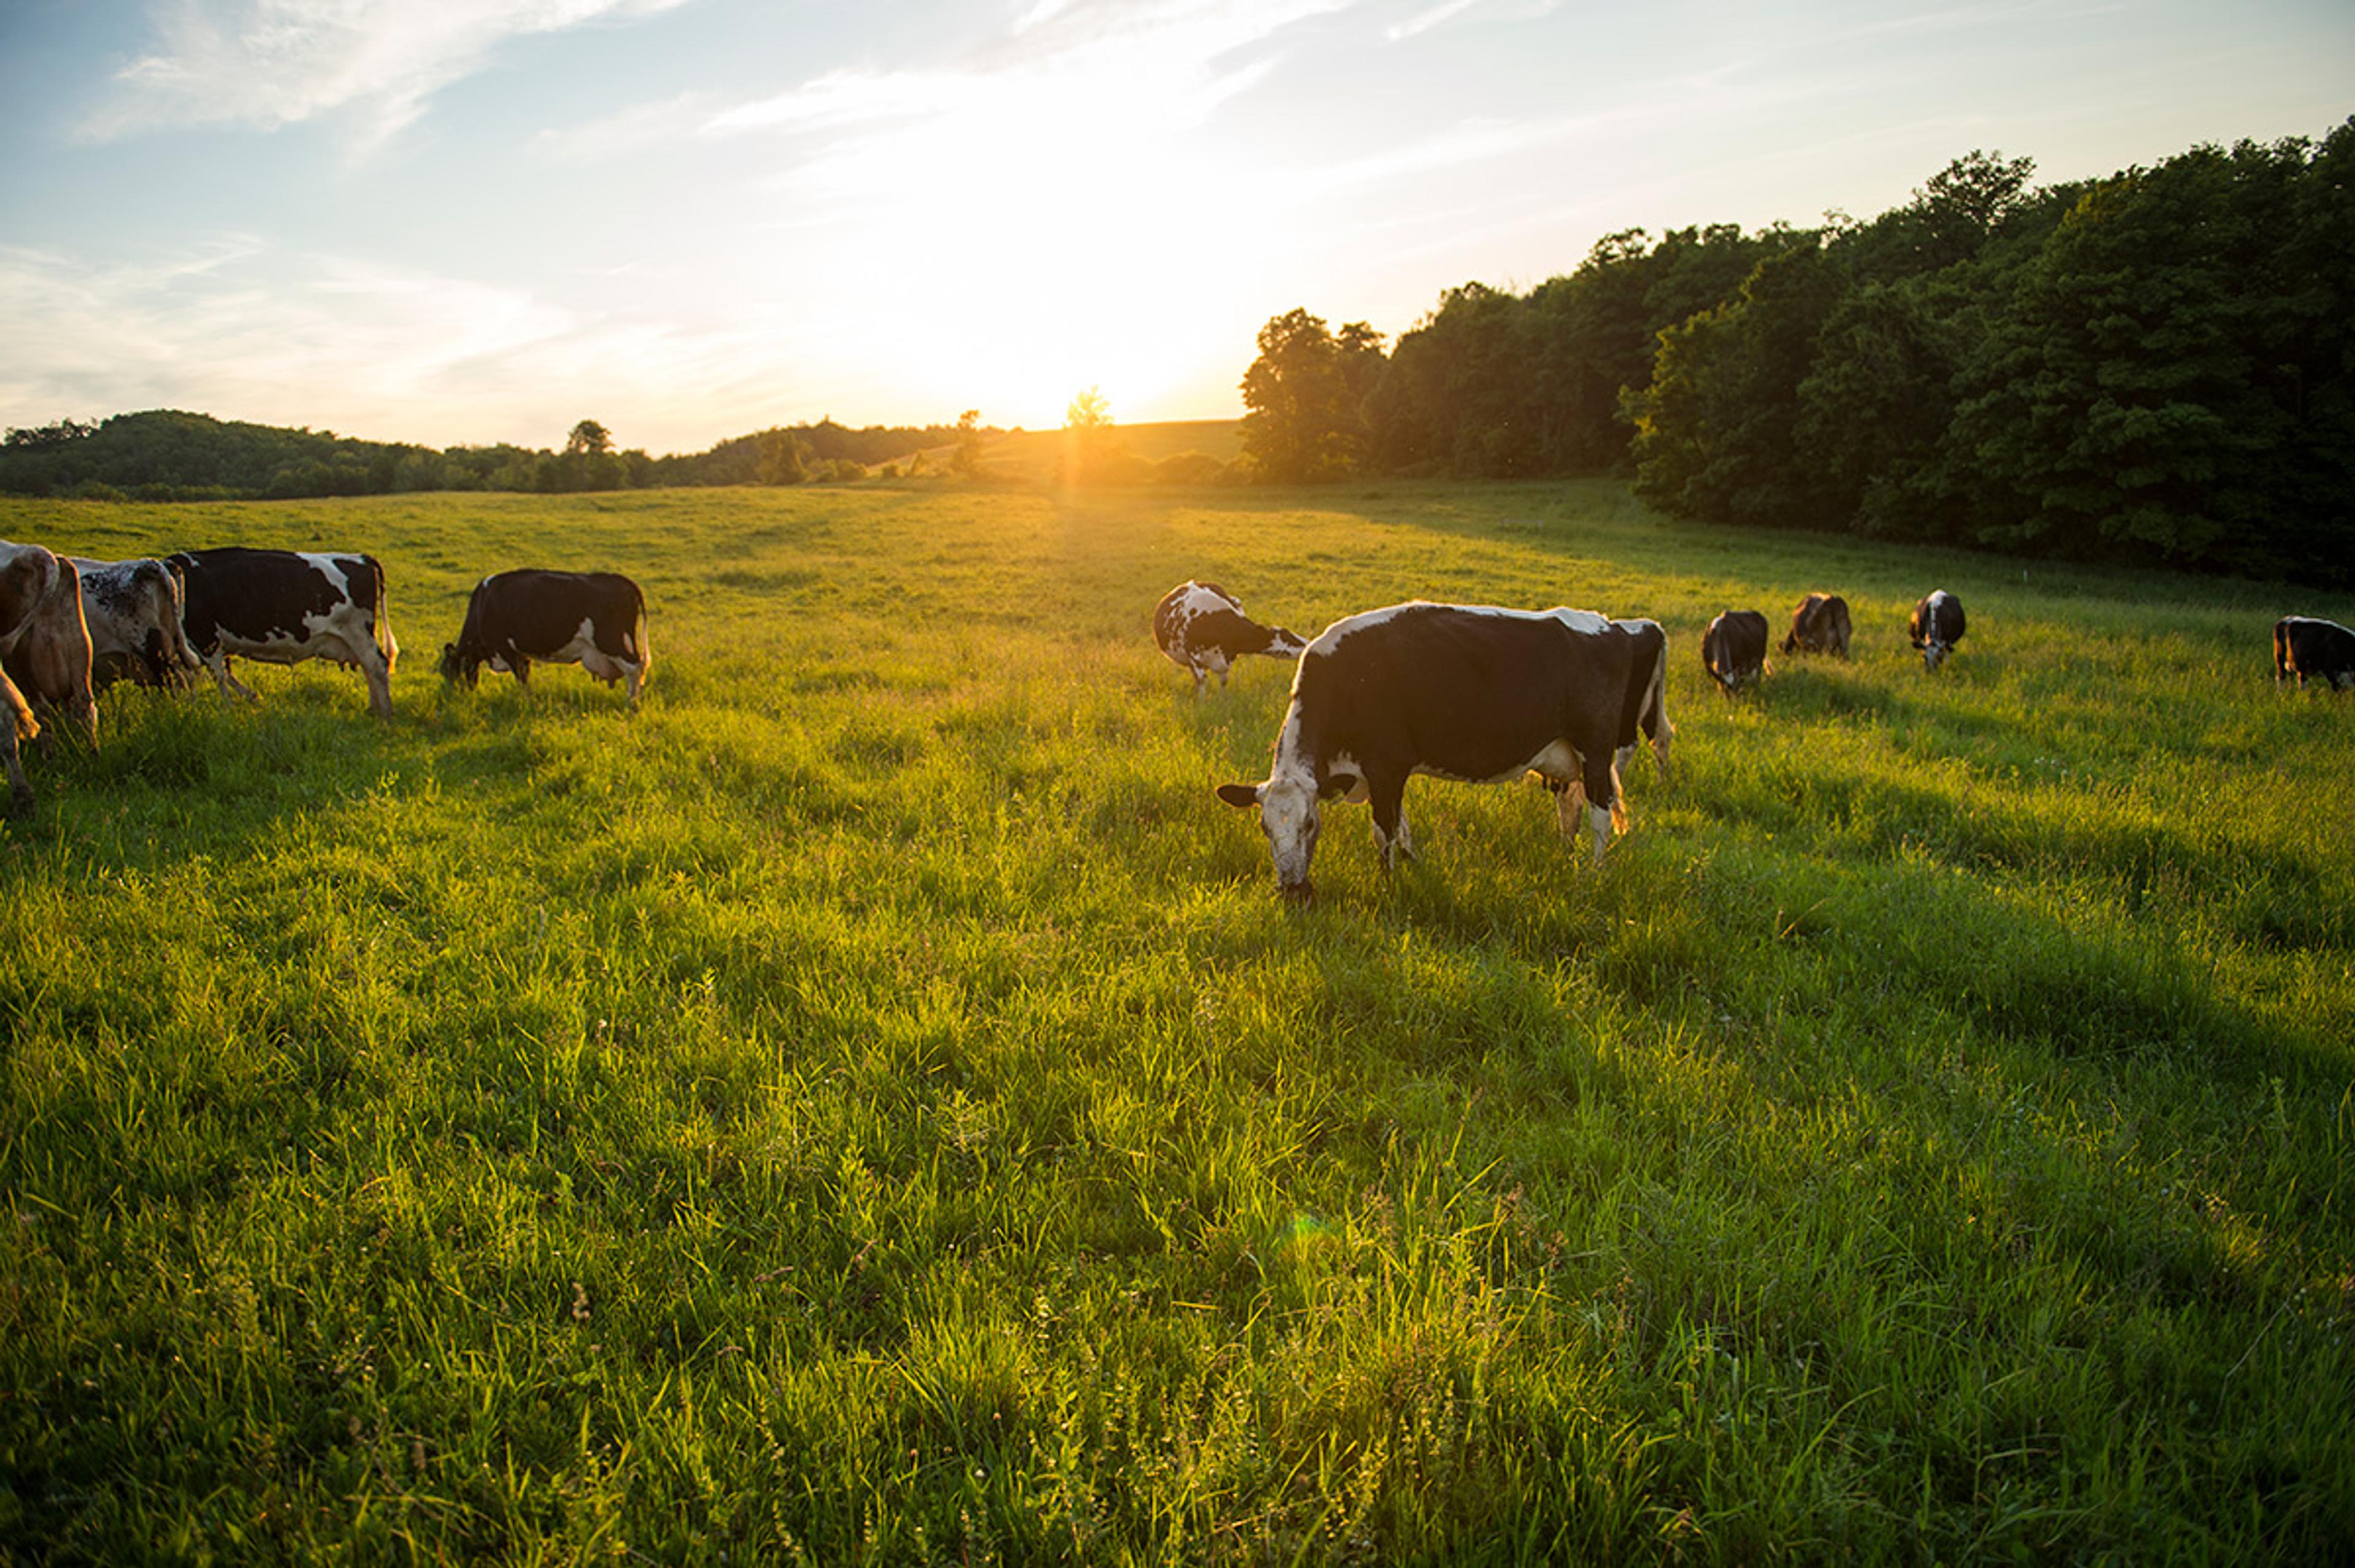 Cows grazing in a pasture at dusk.